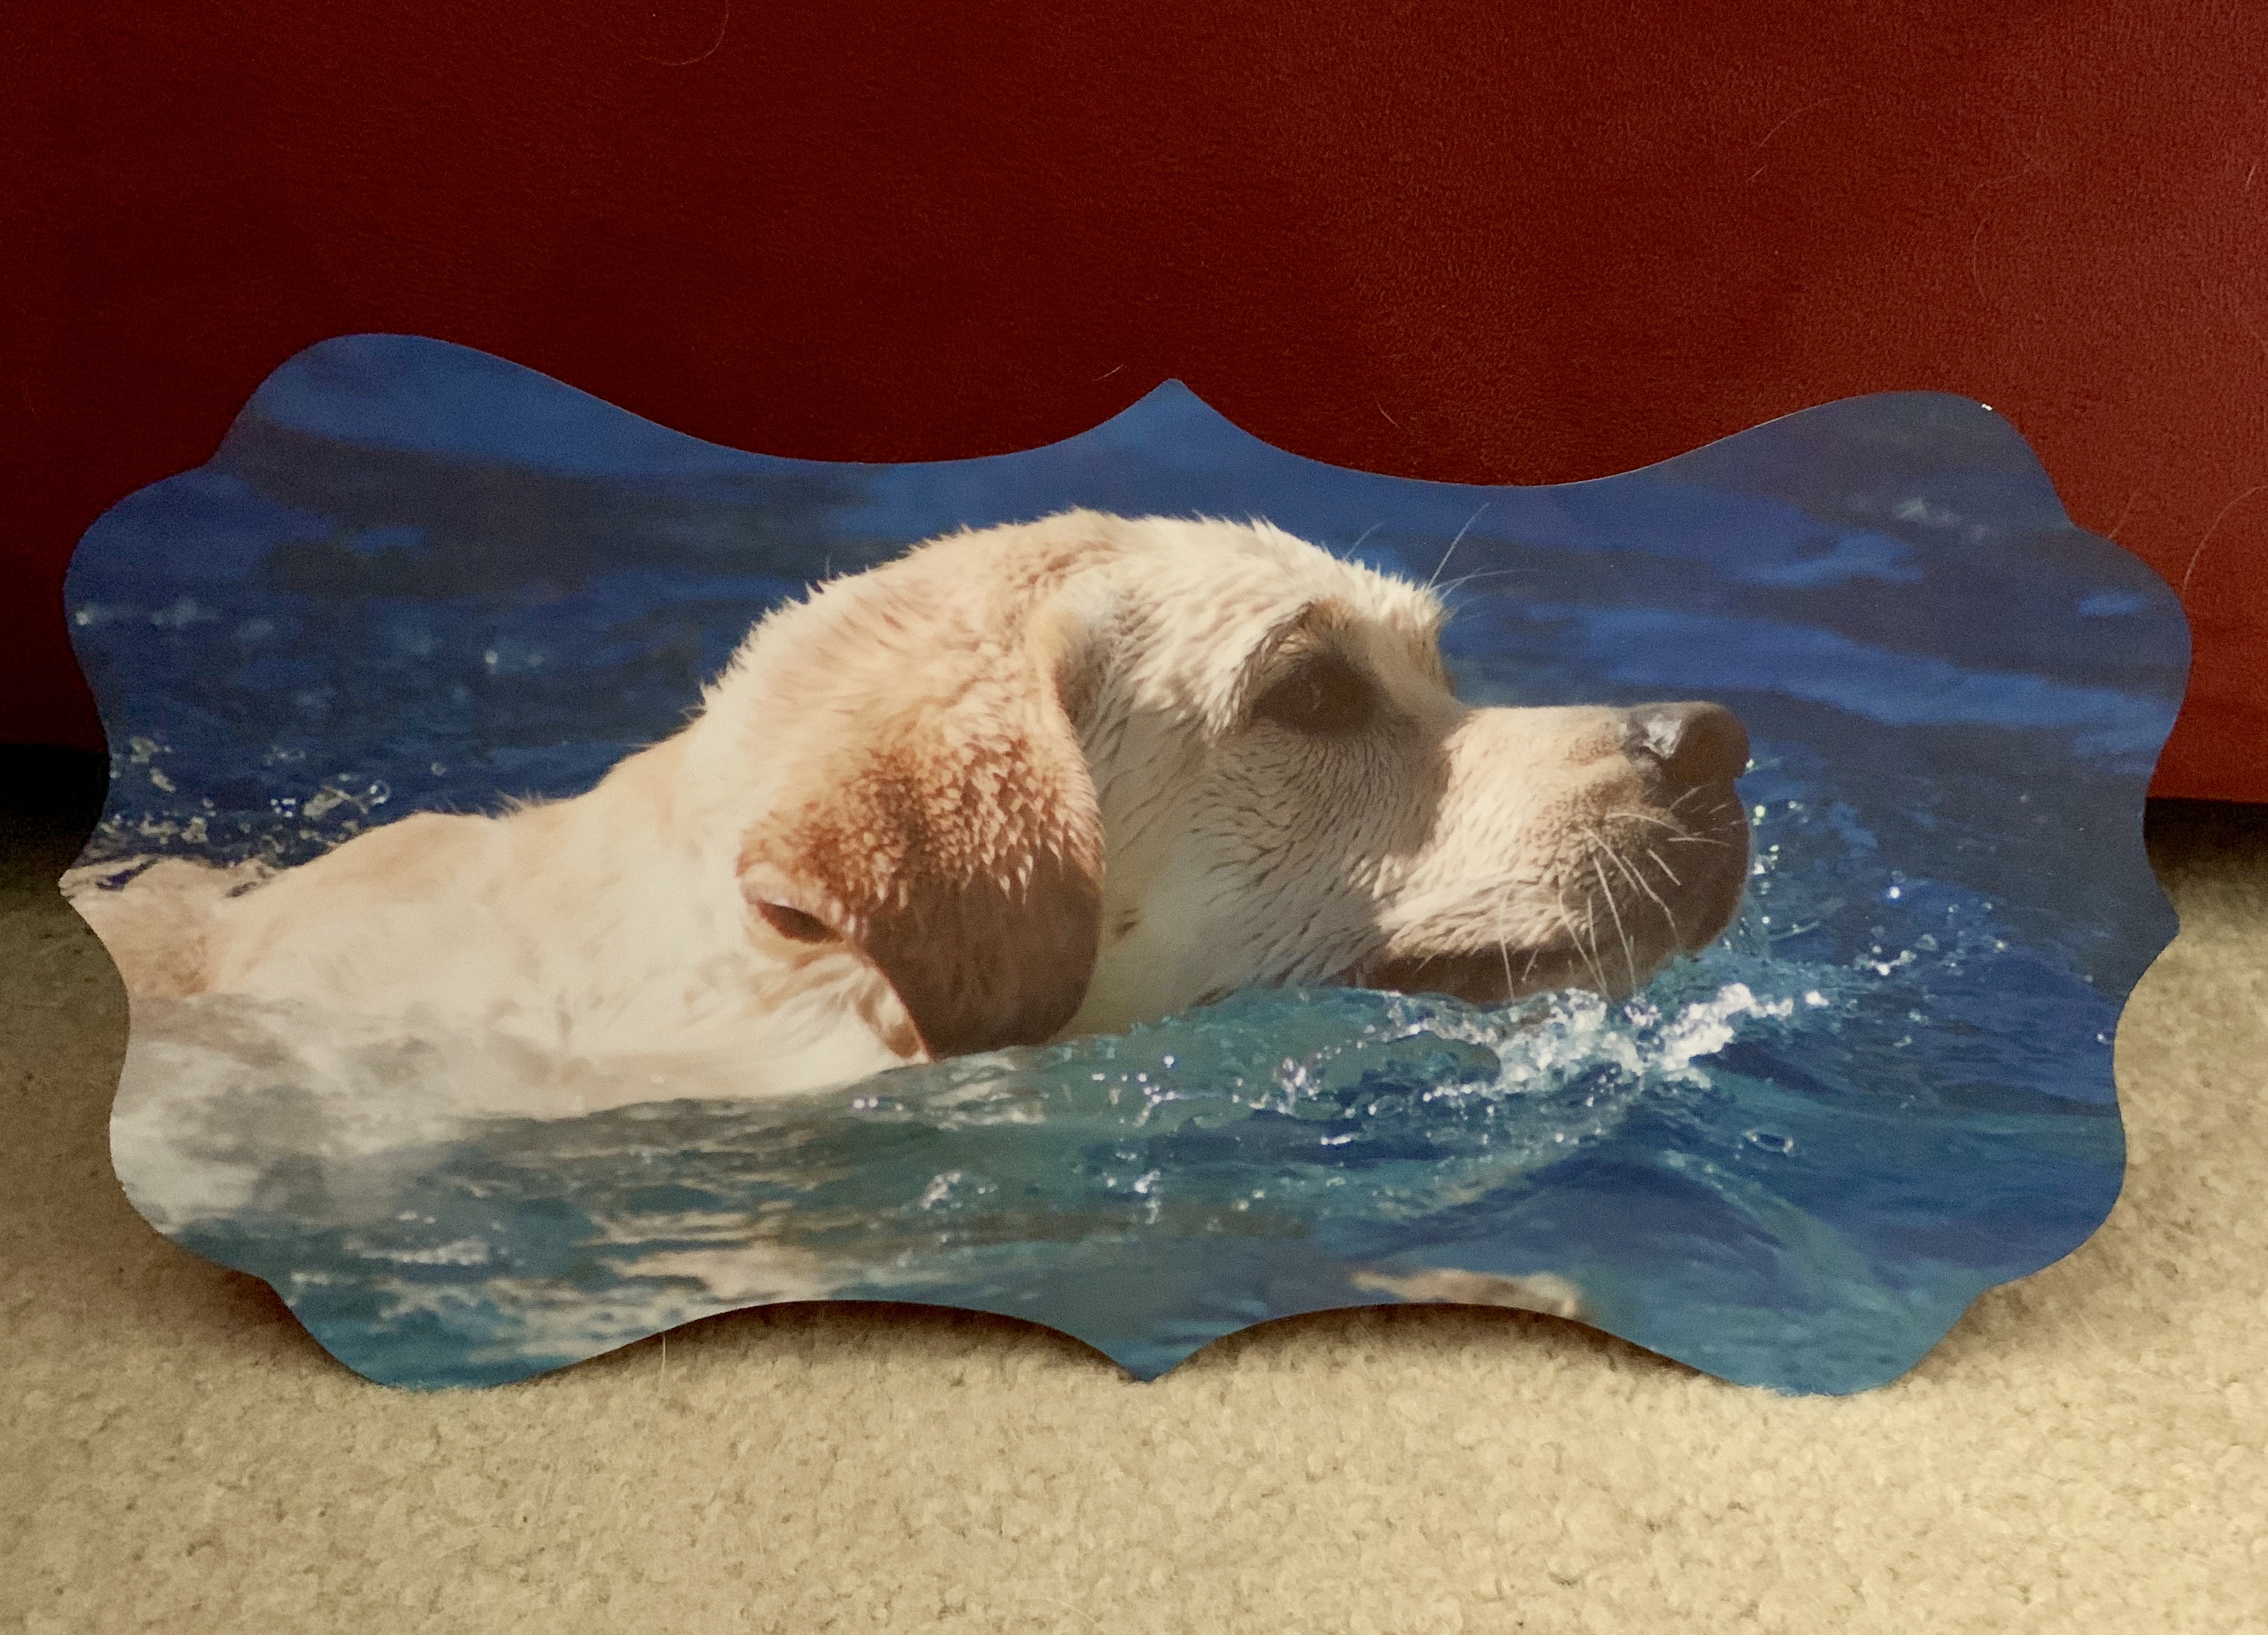 Give a Dog Some Water made with sublimation printing